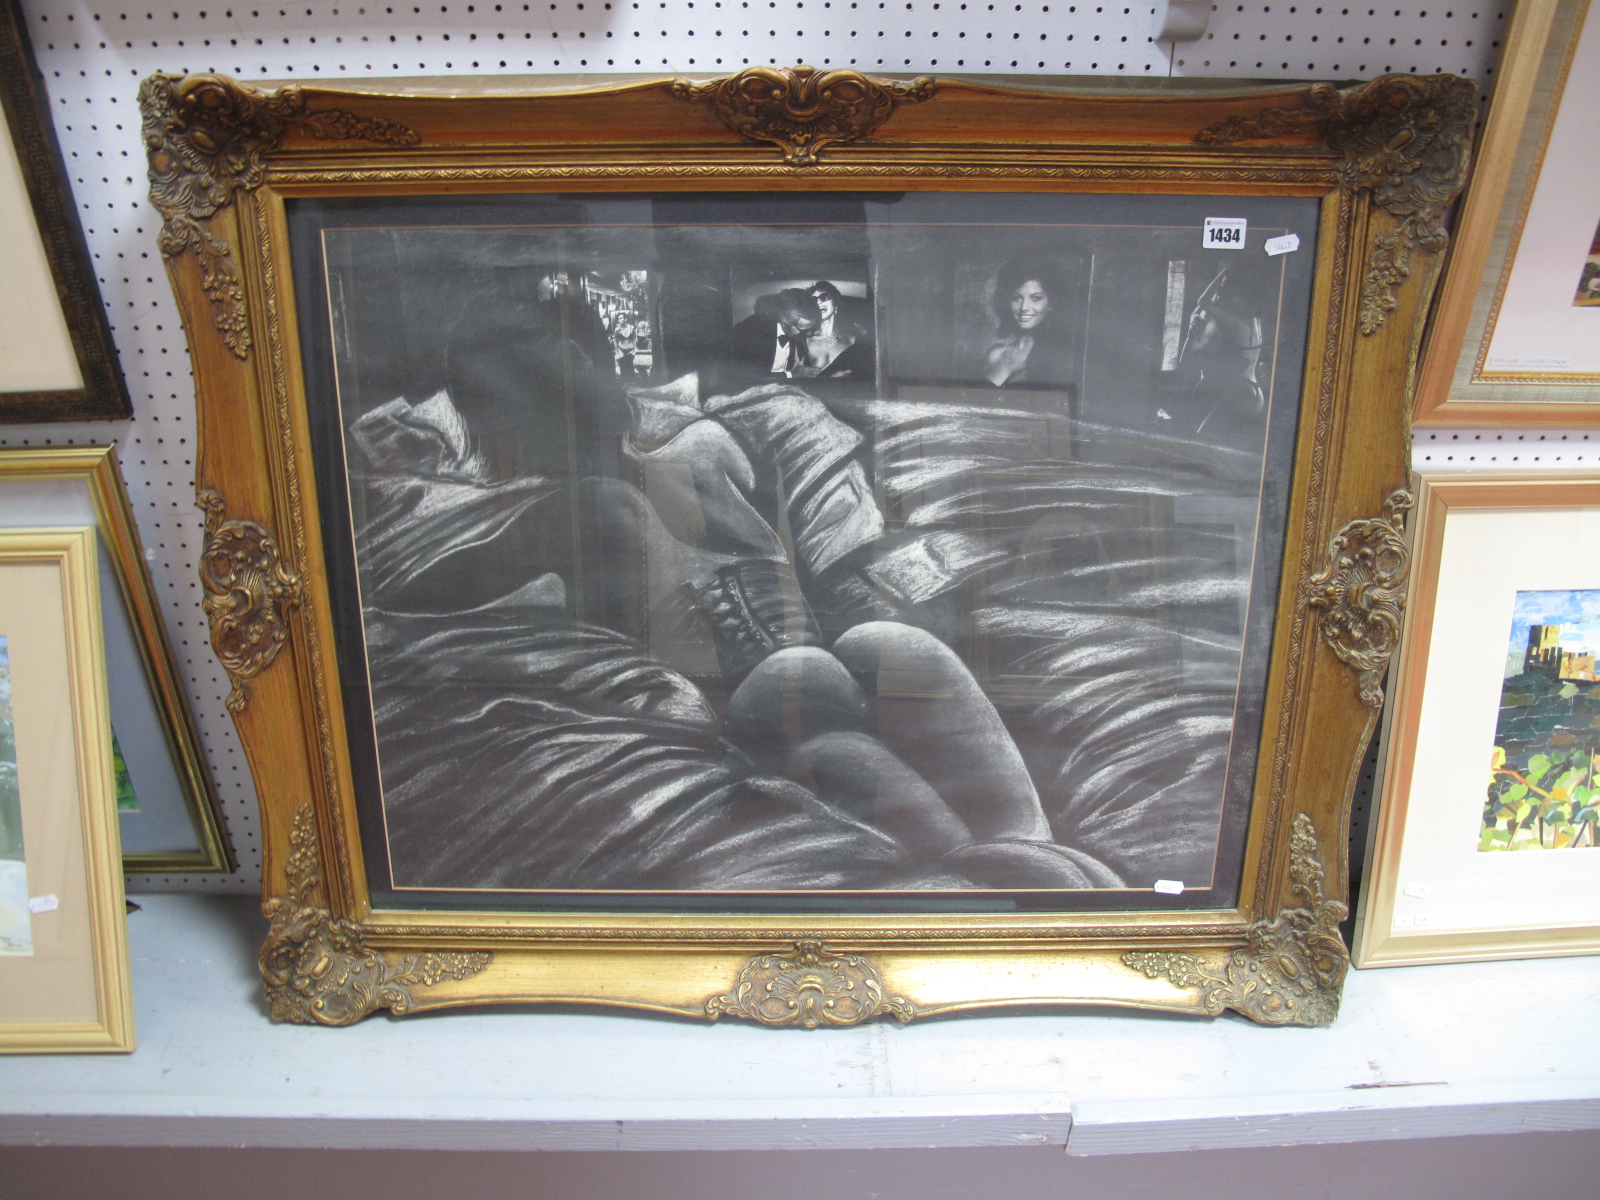 Christopher Grossley Print 'Corsets Good Fun', in a gilt frame.